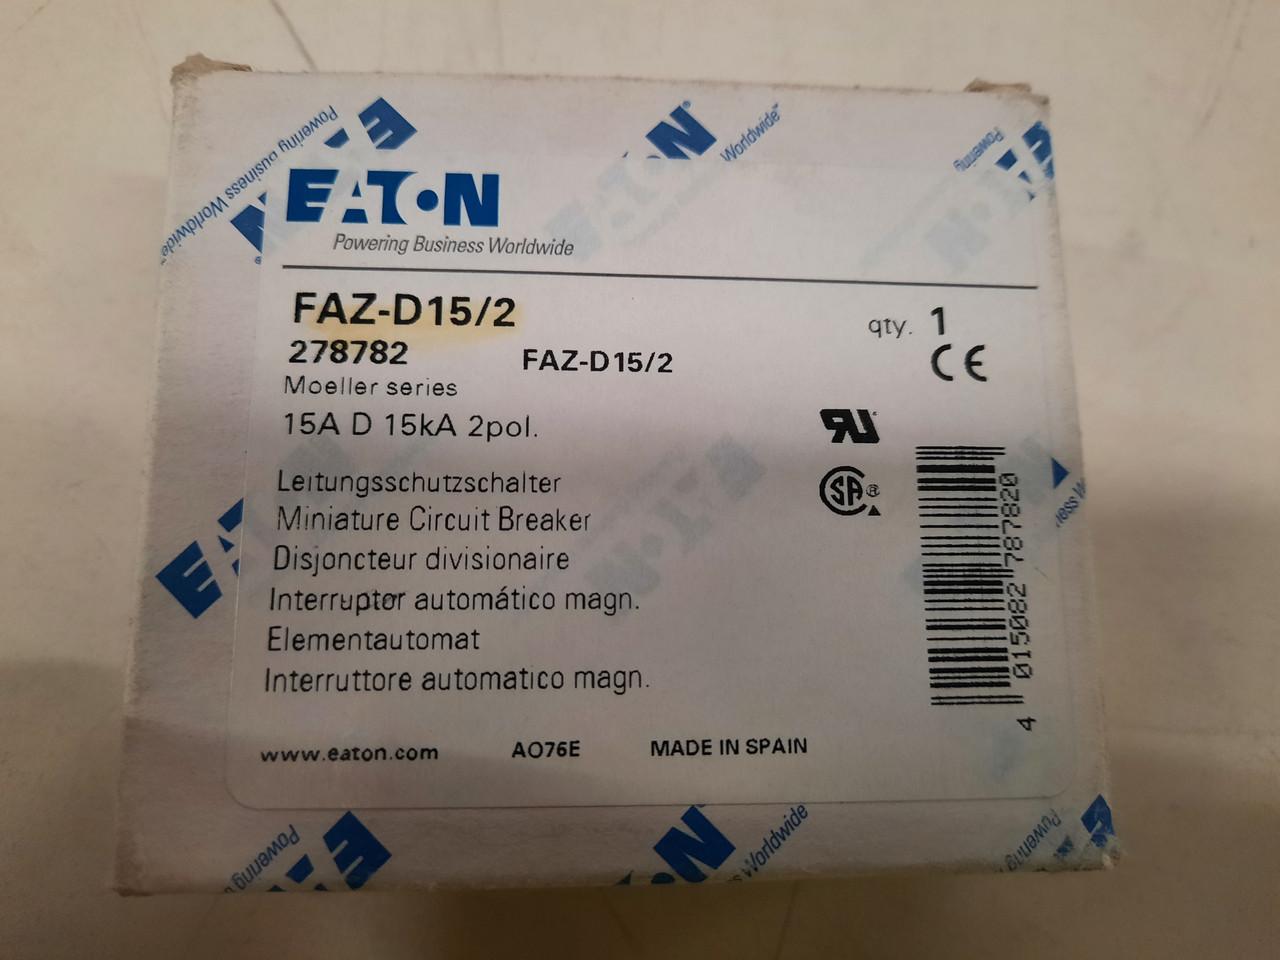 Eaton FAZ-D15/2-RT 277/480 VAC 50/60 Hz, 15 A, 2-Pole, 10/14 kA, 10 to 20 x Rated Current, Ring Tongue Terminal, DIN Rail Mount, Standard Packaging, D-Curve, Current Limiting, Thermal Magnetic, Miniature Circuit Breaker